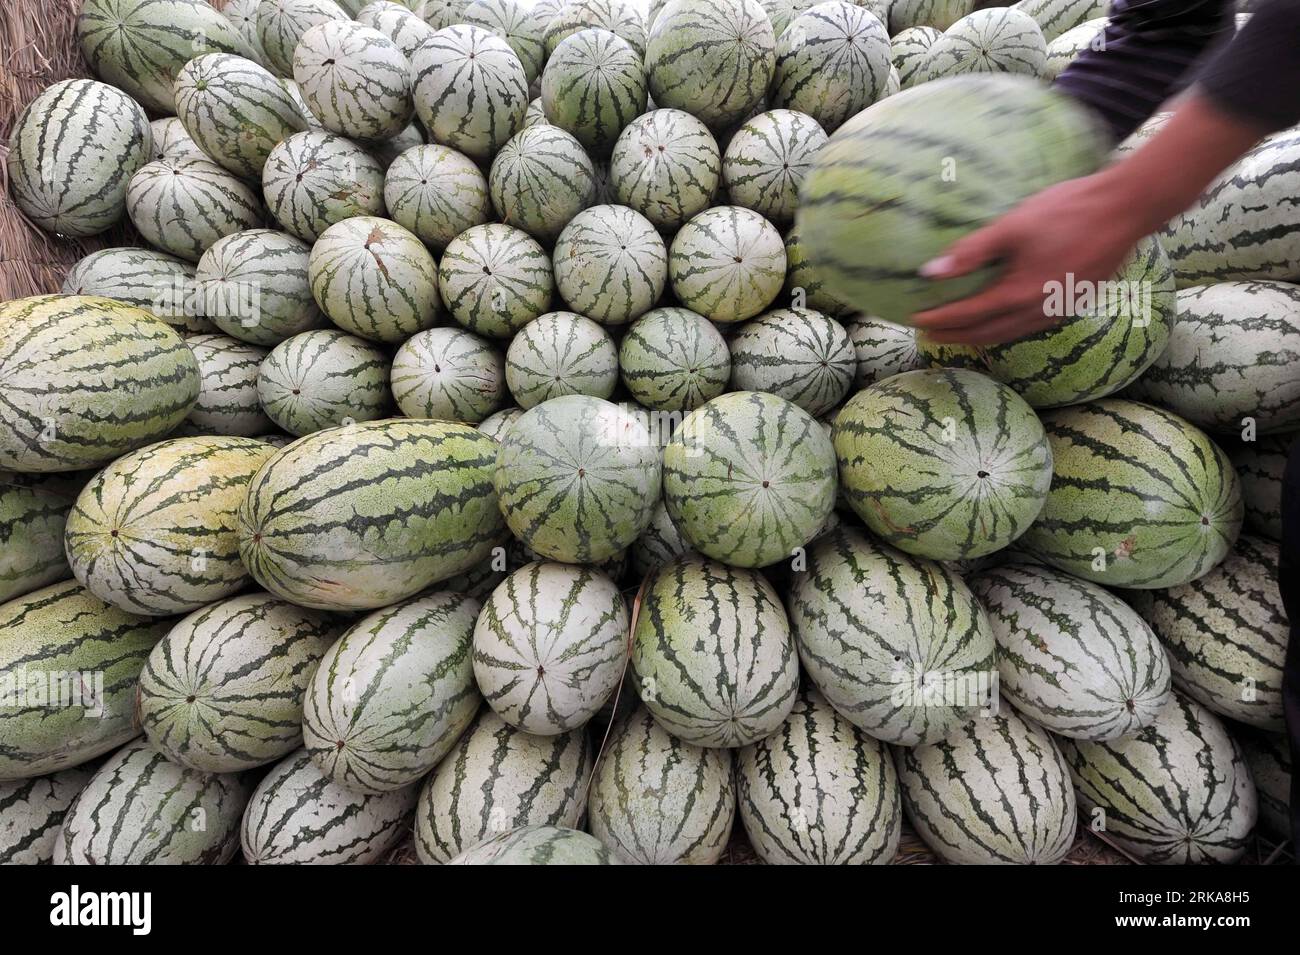 Bildnummer: 54285925  Datum: 09.08.2010  Copyright: imago/Xinhua  A farmer piles up watermelons during the harvest at Xinshui Village of Zhongwei, a city in northwest China s Ningxia Hui Autonomous Region, Aug. 9, 2010. The farmers in Zhongwei have developed a way to plant watermelons in gravel-mulched field, in which watermelons can be more juicy and delicious than in normal ways. (Xinhua/Wang Peng) (zn) CHINA-NINGXIA-ZHONGWEI-WATERMELON (CN) PUBLICATIONxNOTxINxCHN Wirtschaft Landwirtschaft Melonen kbdig xmk 2010 quer    Bildnummer 54285925 Date 09 08 2010 Copyright Imago XINHUA a Farmer pile Stock Photo